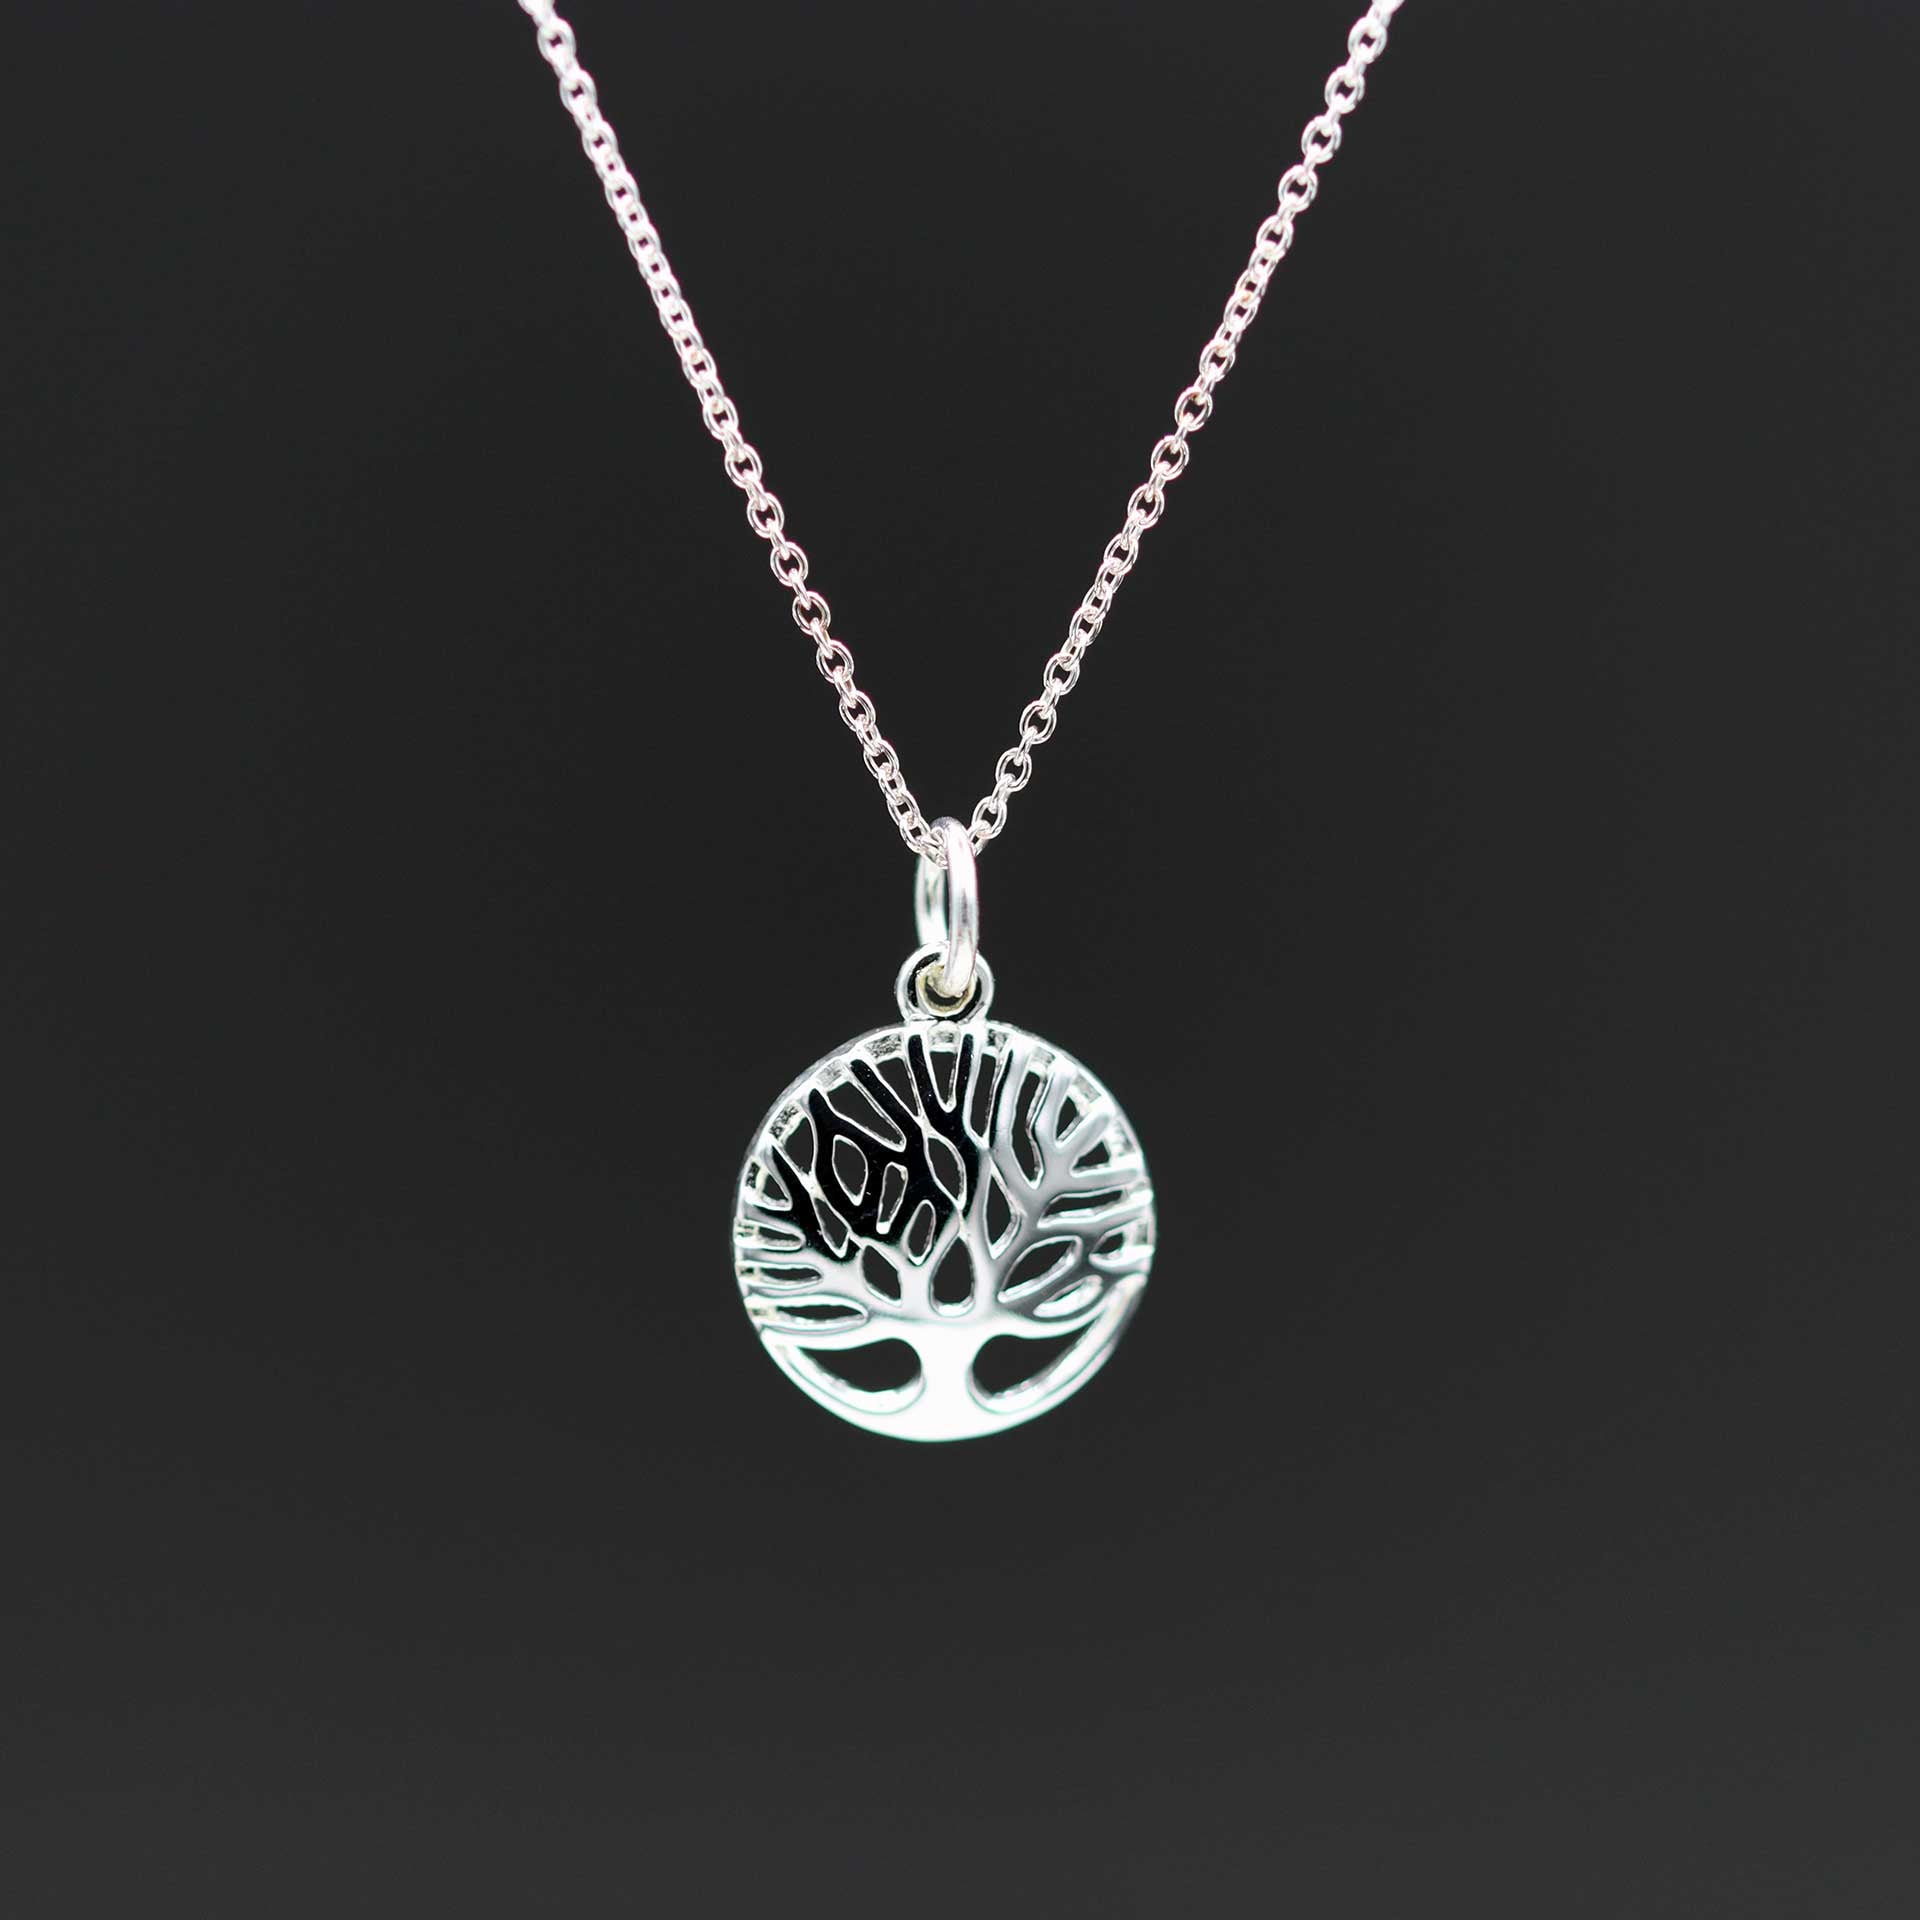 Special Sale 30% OFF @ Checkout- Tree of Life Necklace